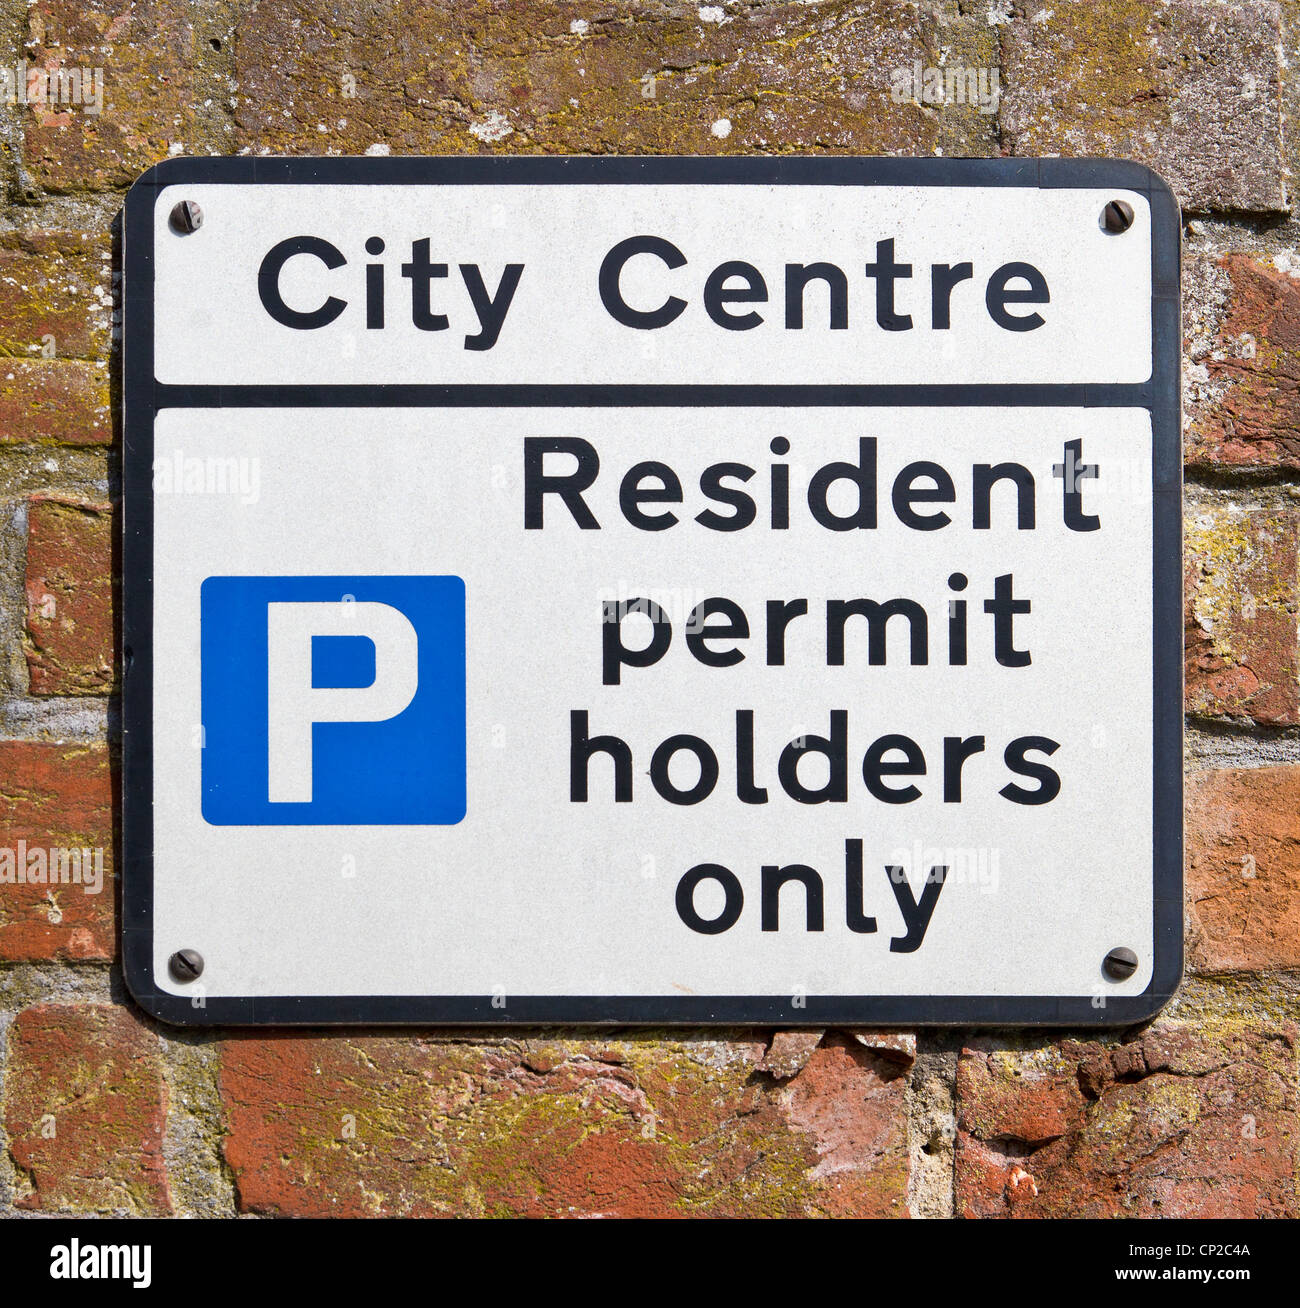 Resident Permit Holders Only Parking Sign City Centre Parking Stock Photo